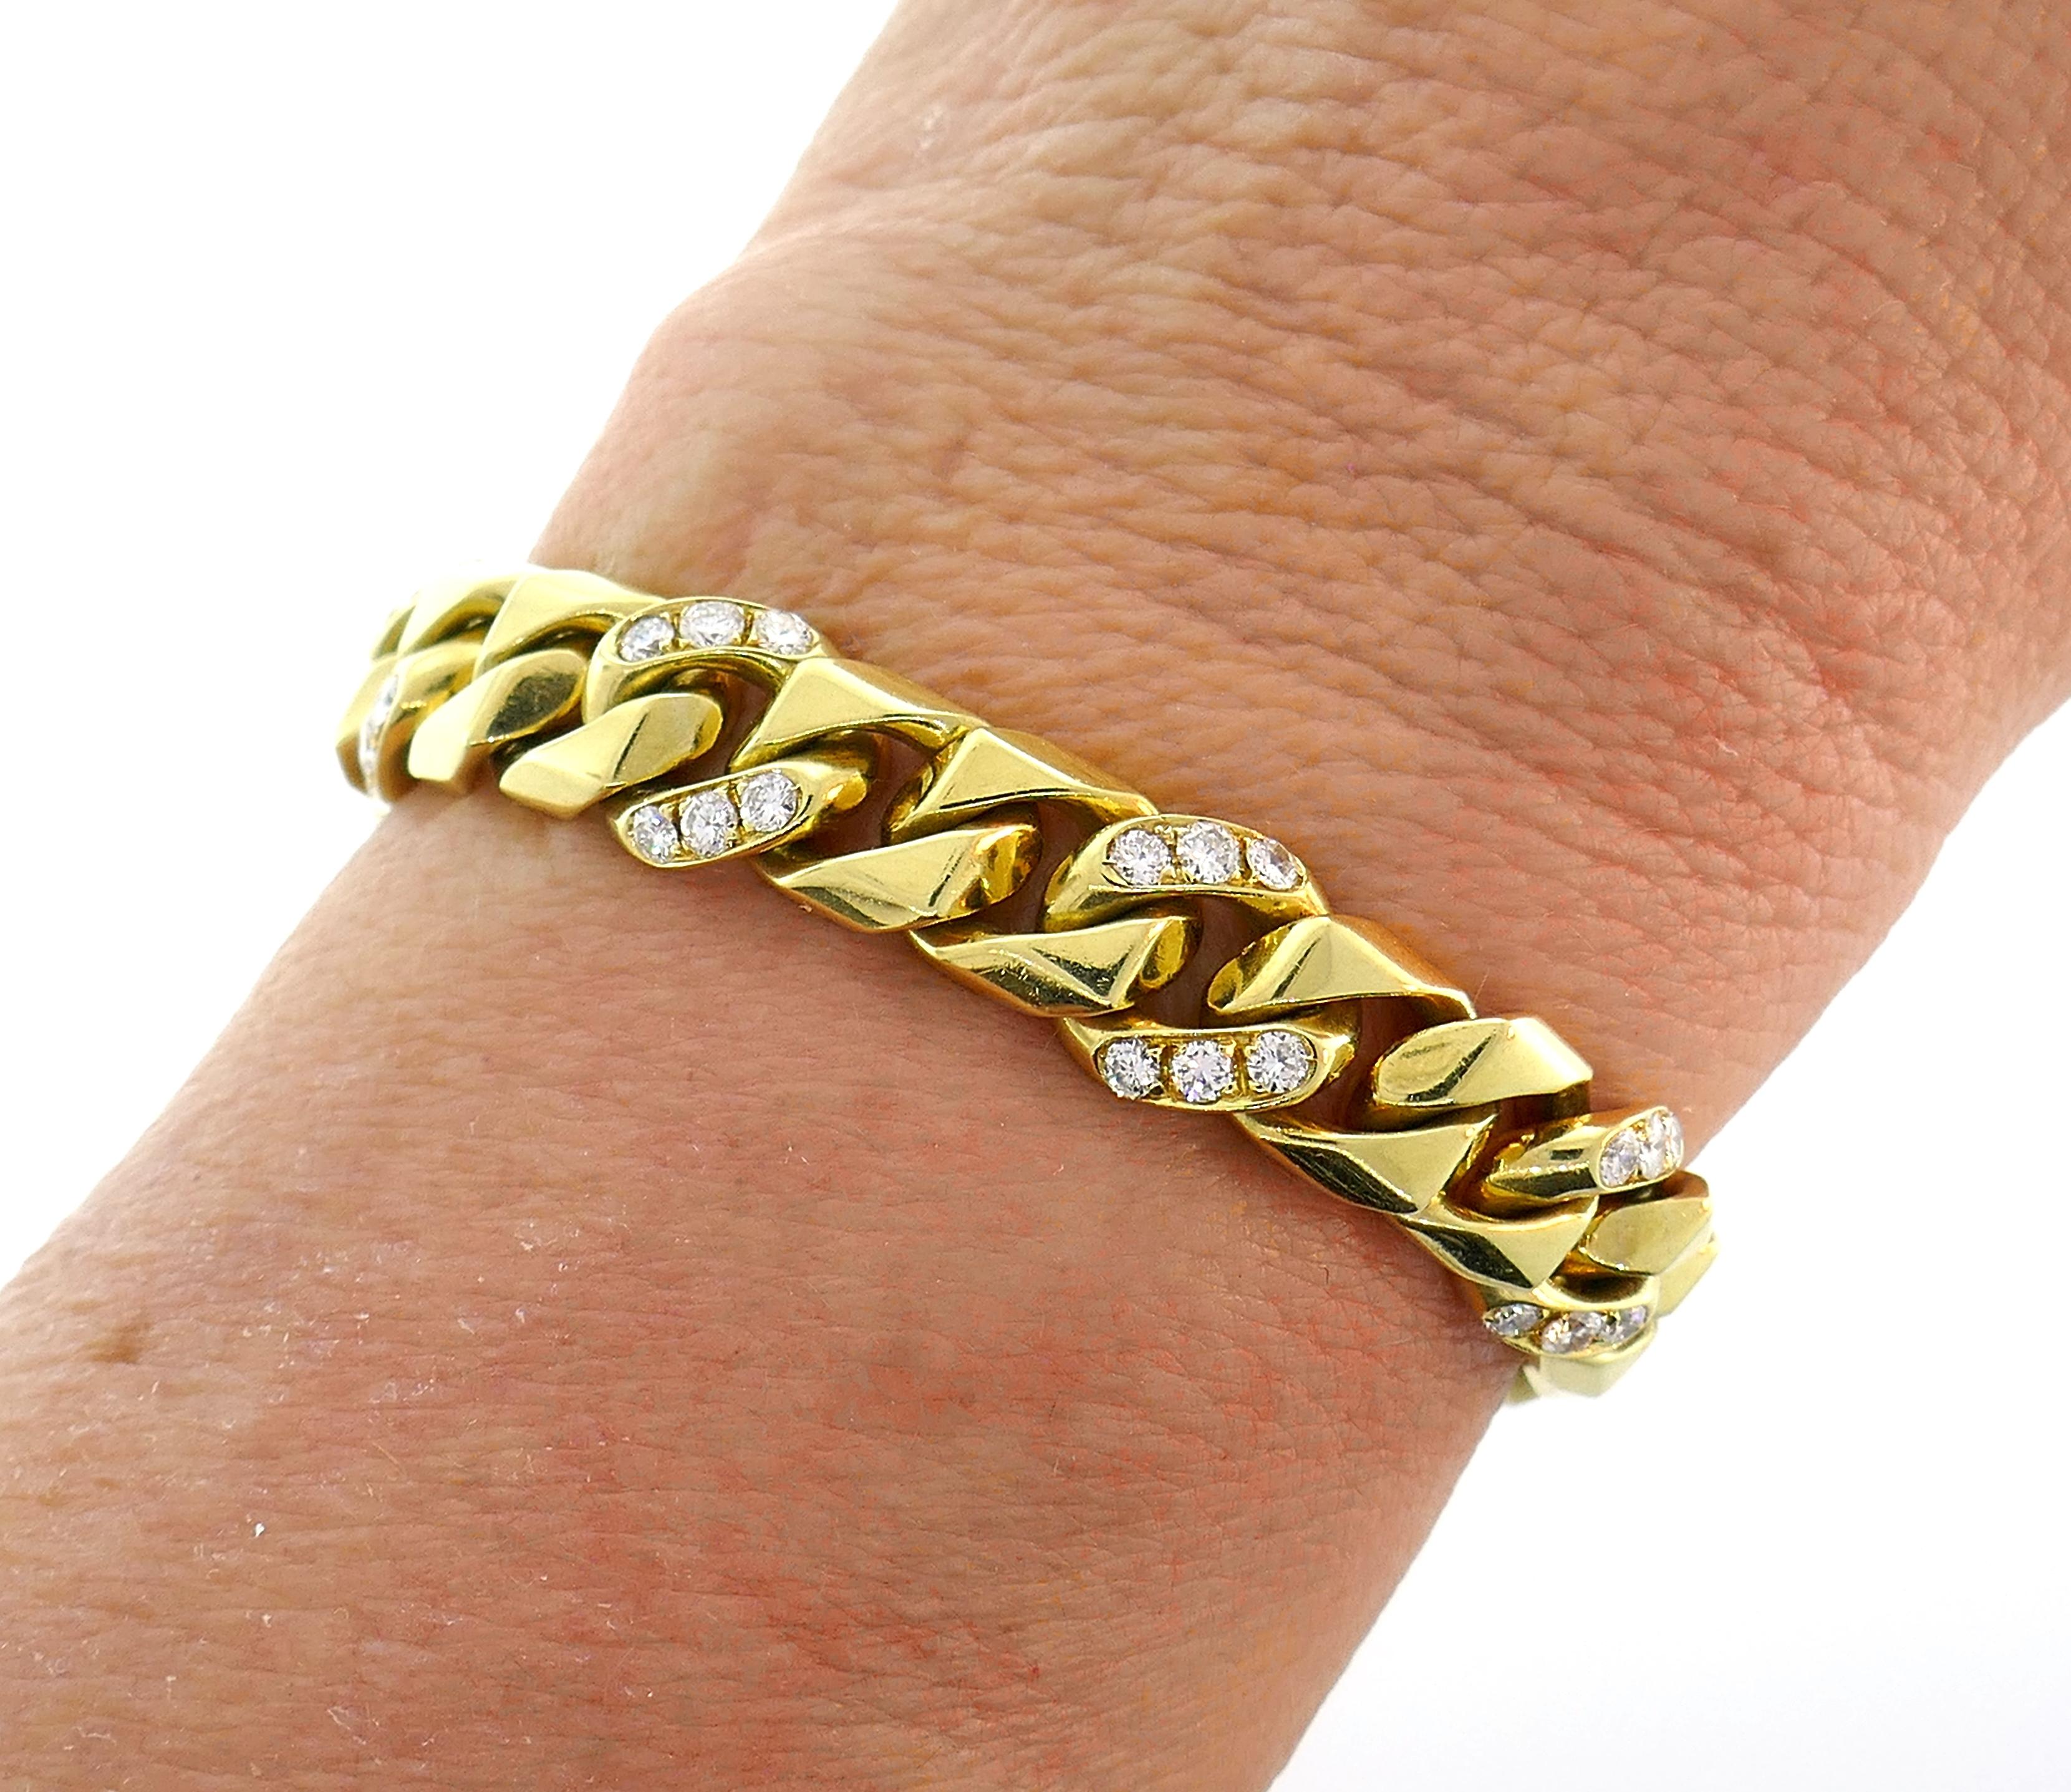 Bold yet elegant bracelet created by Bulgari in Italy in the 1980s. Chic and wearable, the bracelet is a great addition to your jewelry collection. 
The bracelet is made of 18 karat yellow gold and set with round brilliant cut diamonds (F-g color VS